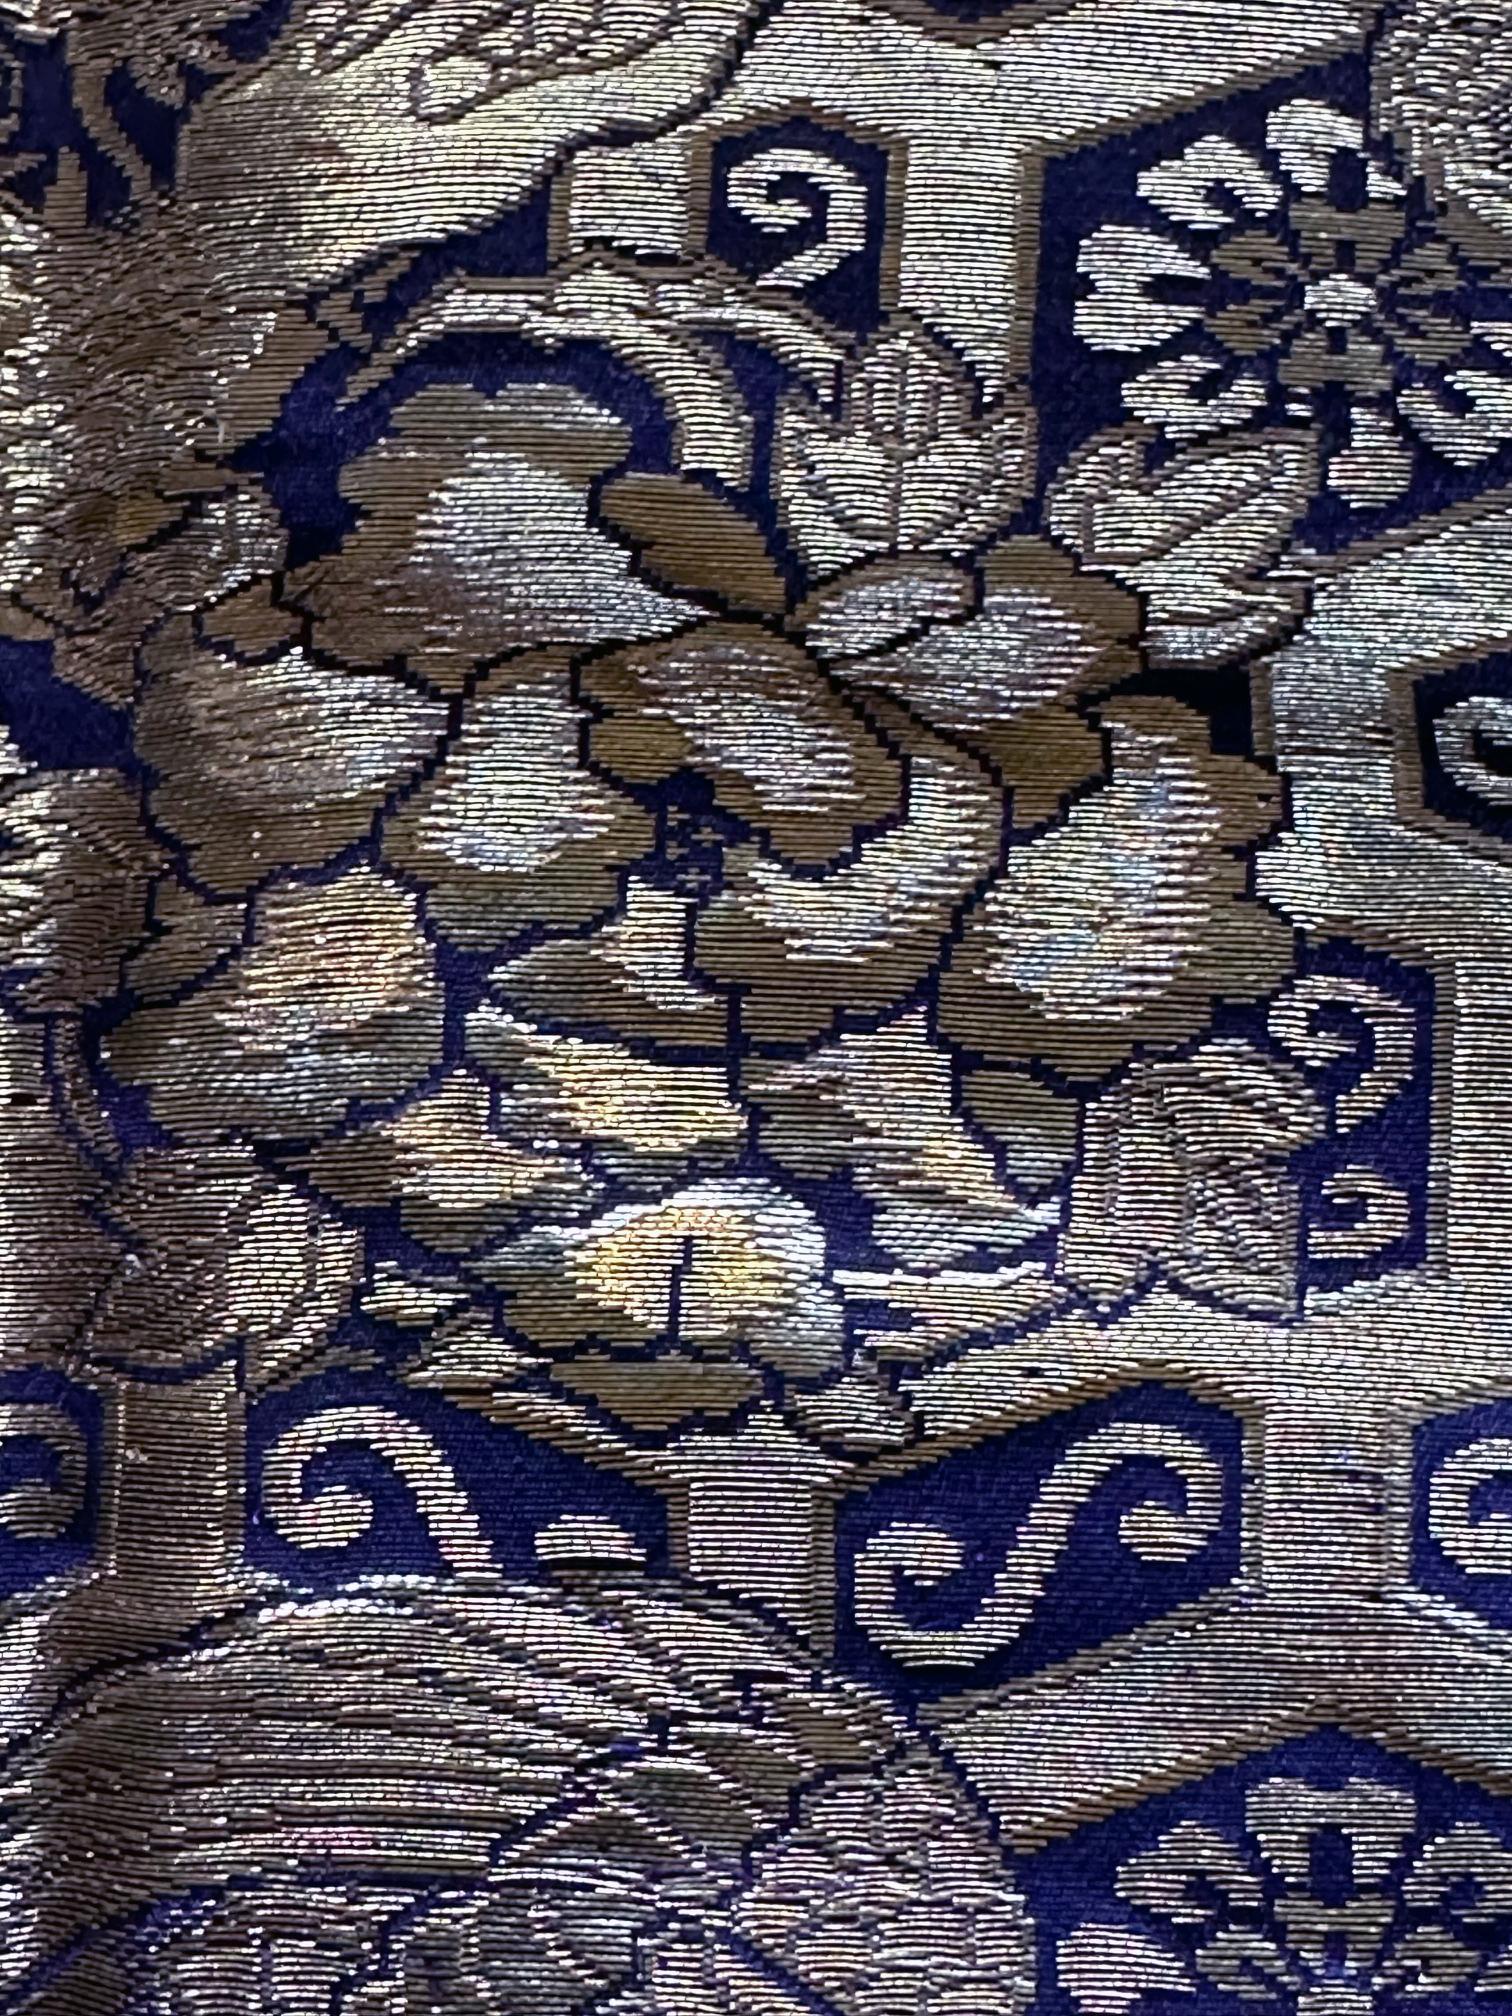 Magnificent Antique Japanese Woven Brocade Kesa Monk's Robe Meiji Period For Sale 15